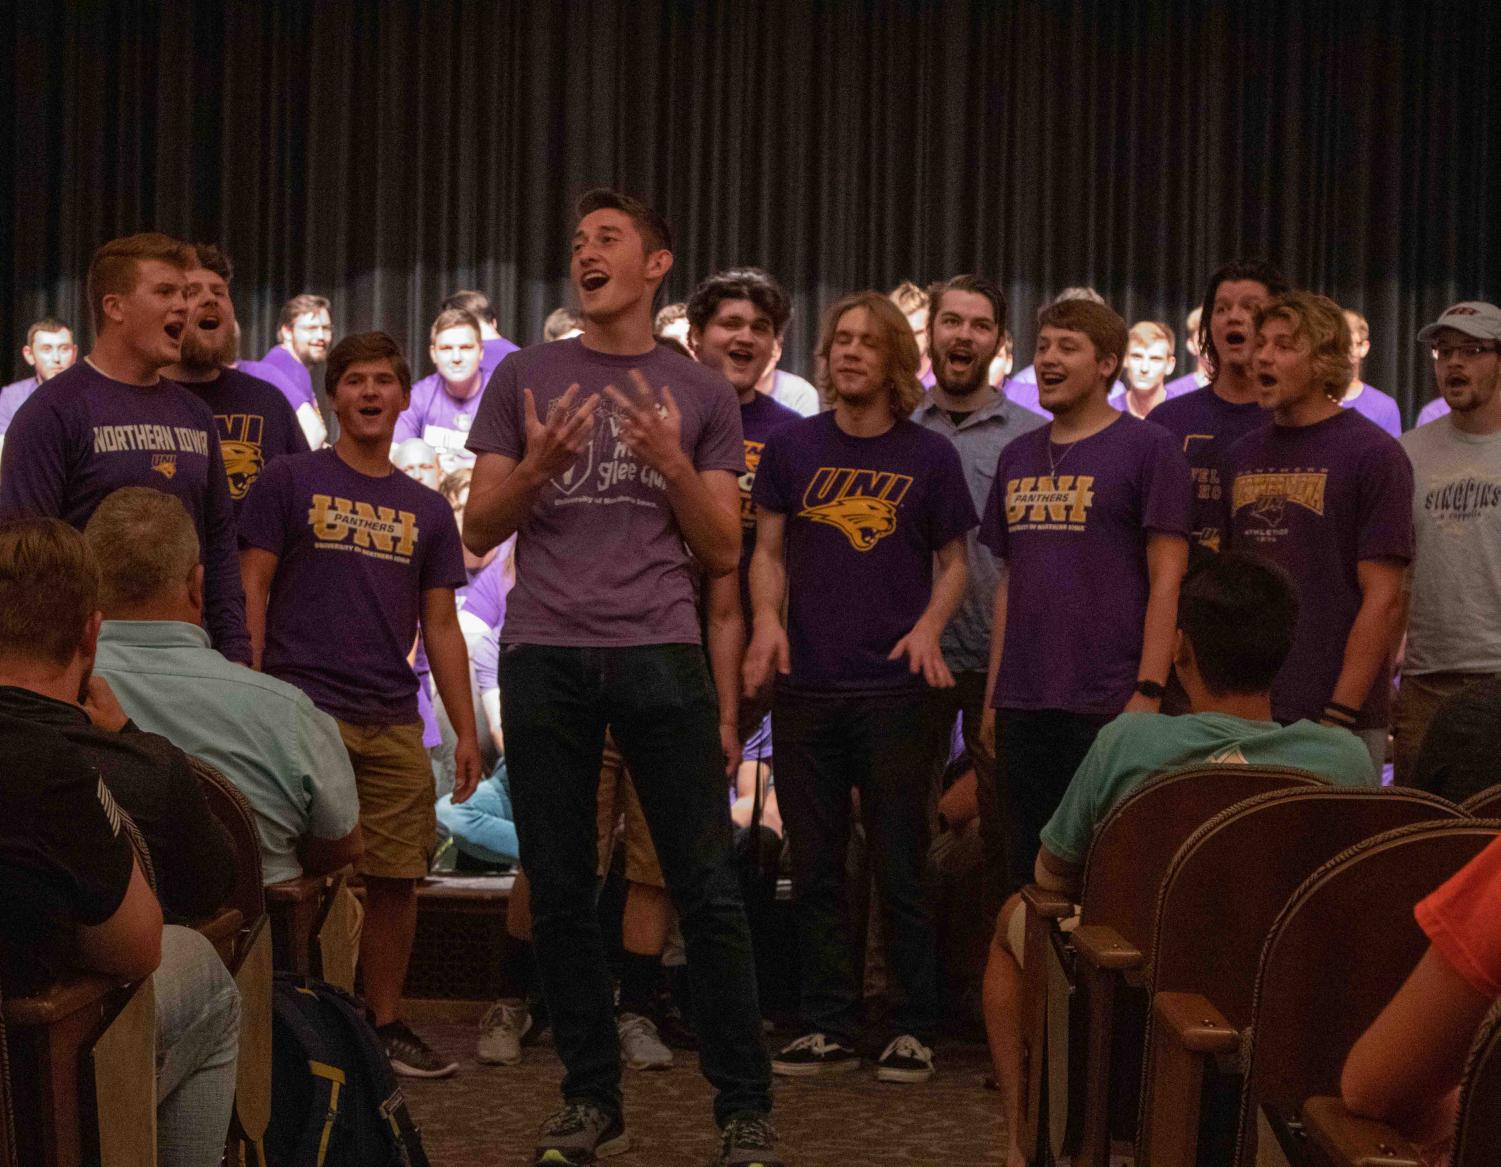 Glee+Club+welcomes+students+in+song